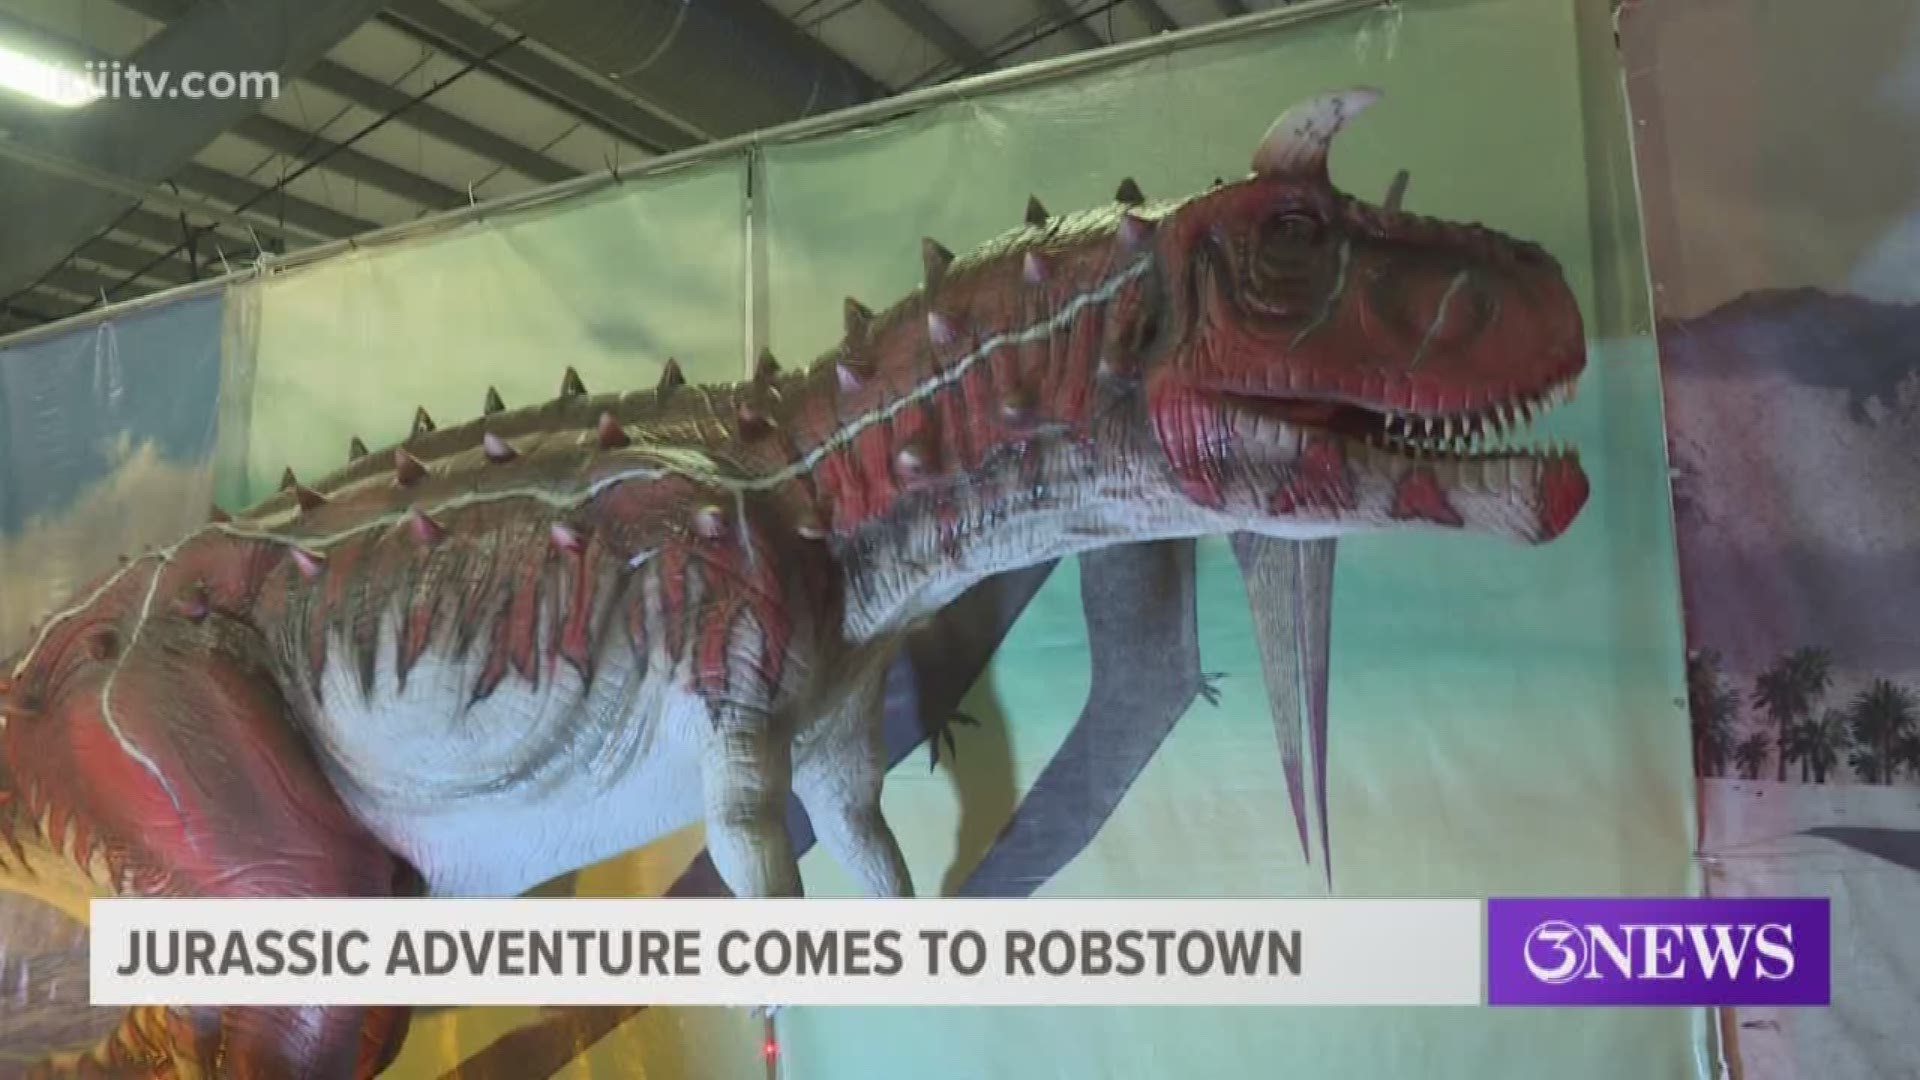 Dinosaurs come to life at exhibit in Robstown